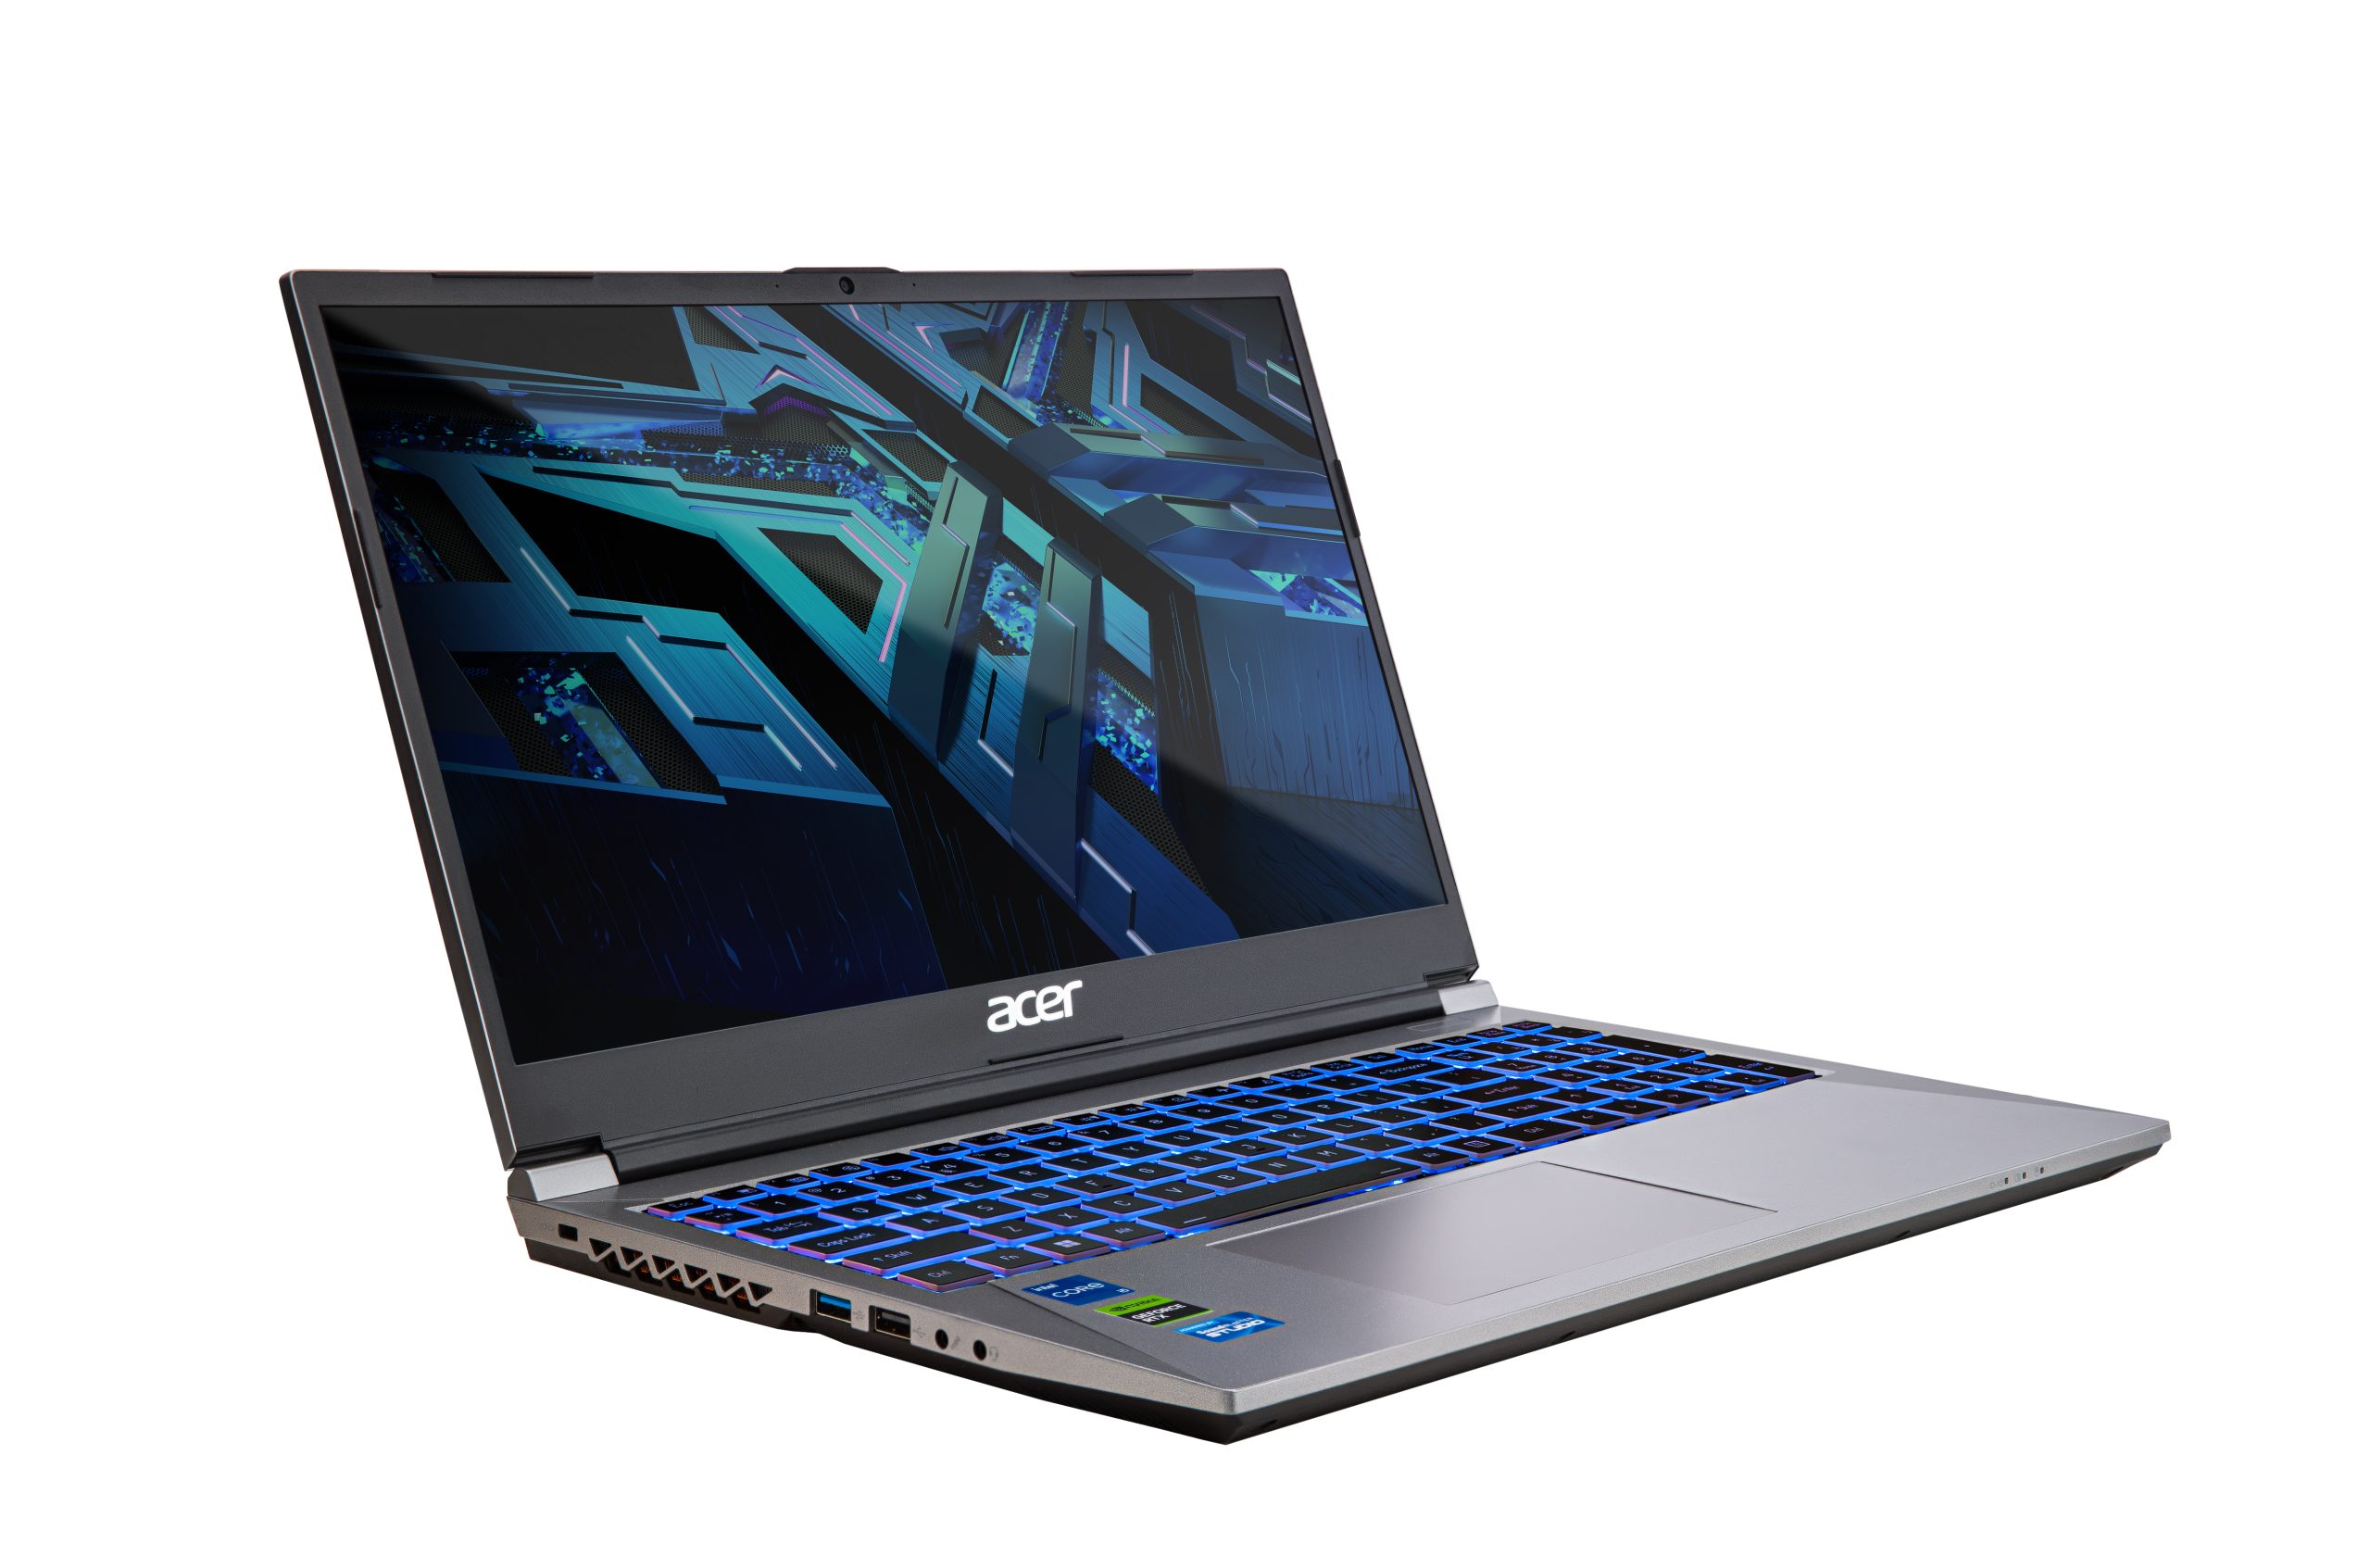 Priced at Rs 56,990, the Acer ALG gaming laptop is available in India